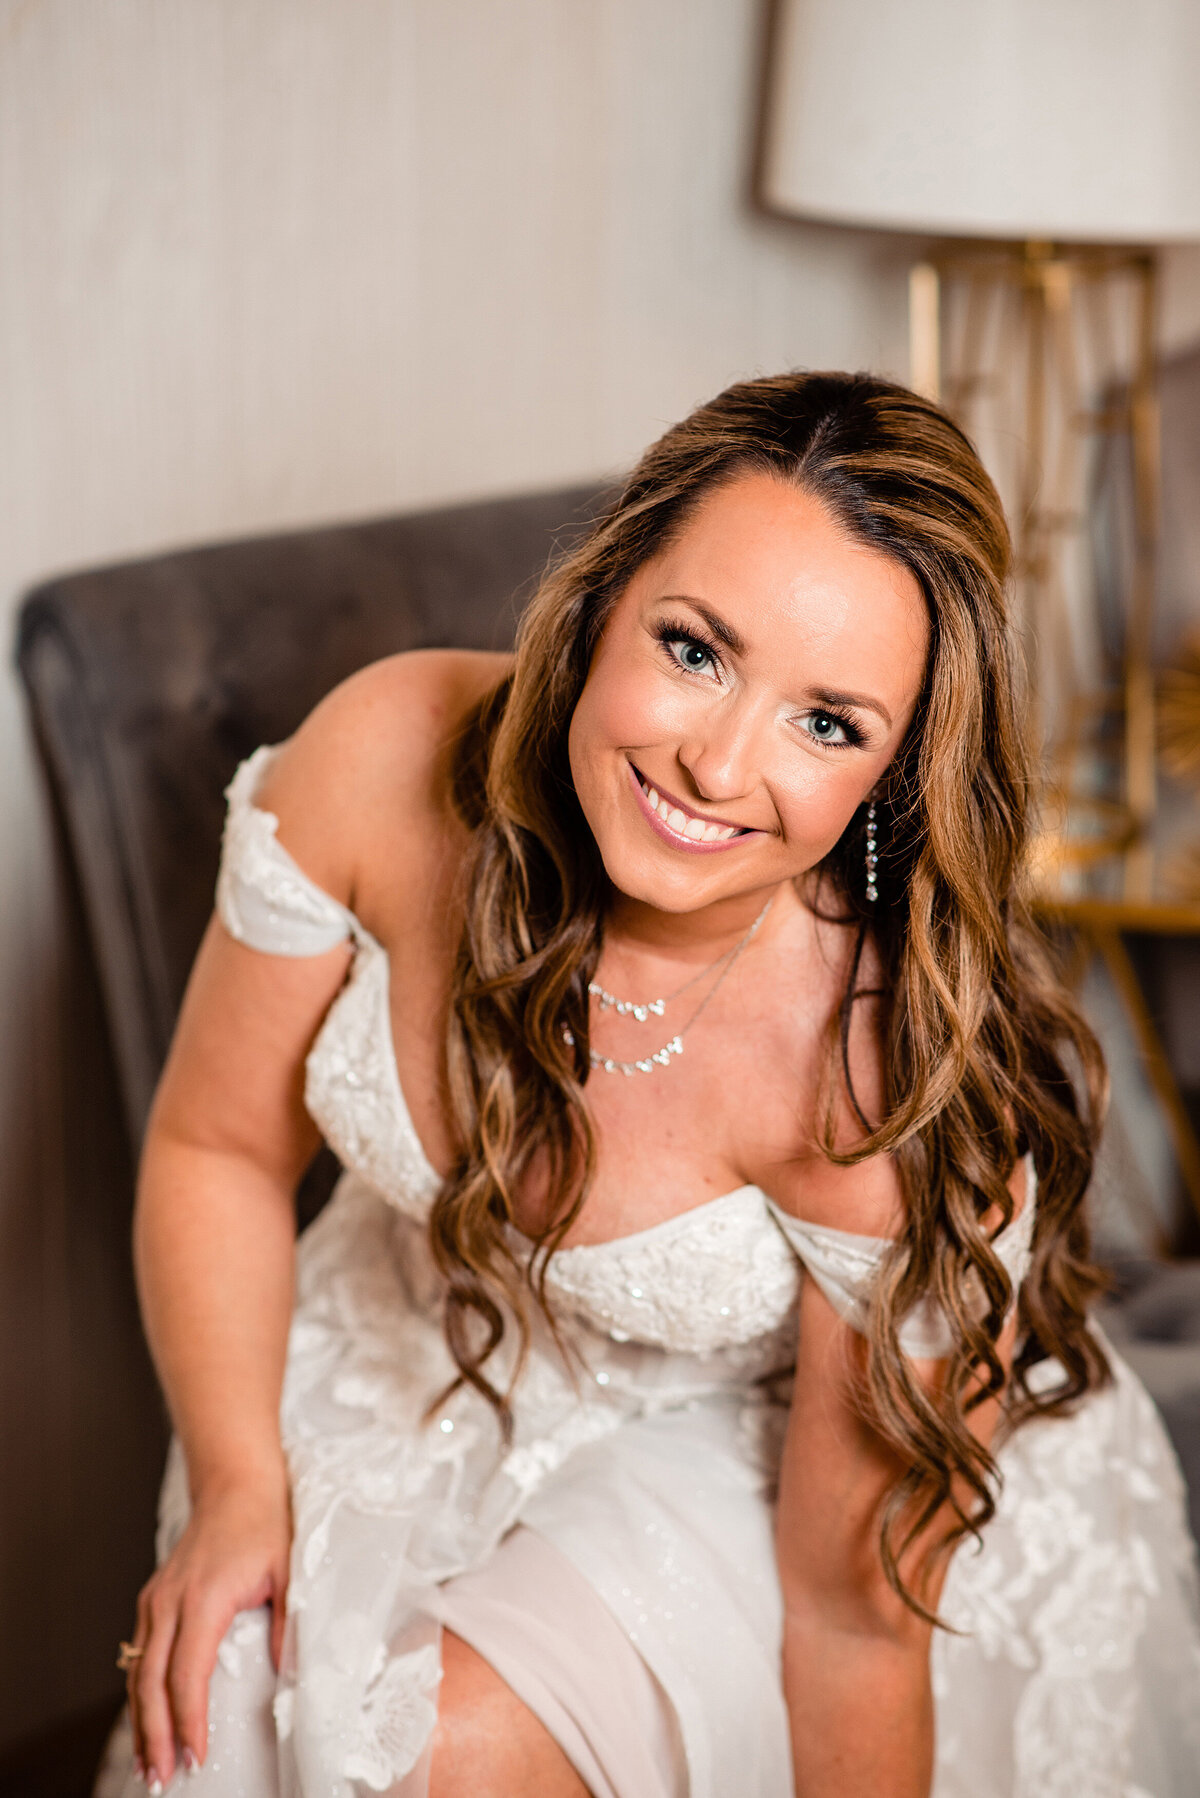 Bride smiling up at the camera while putting on her wedding shoes